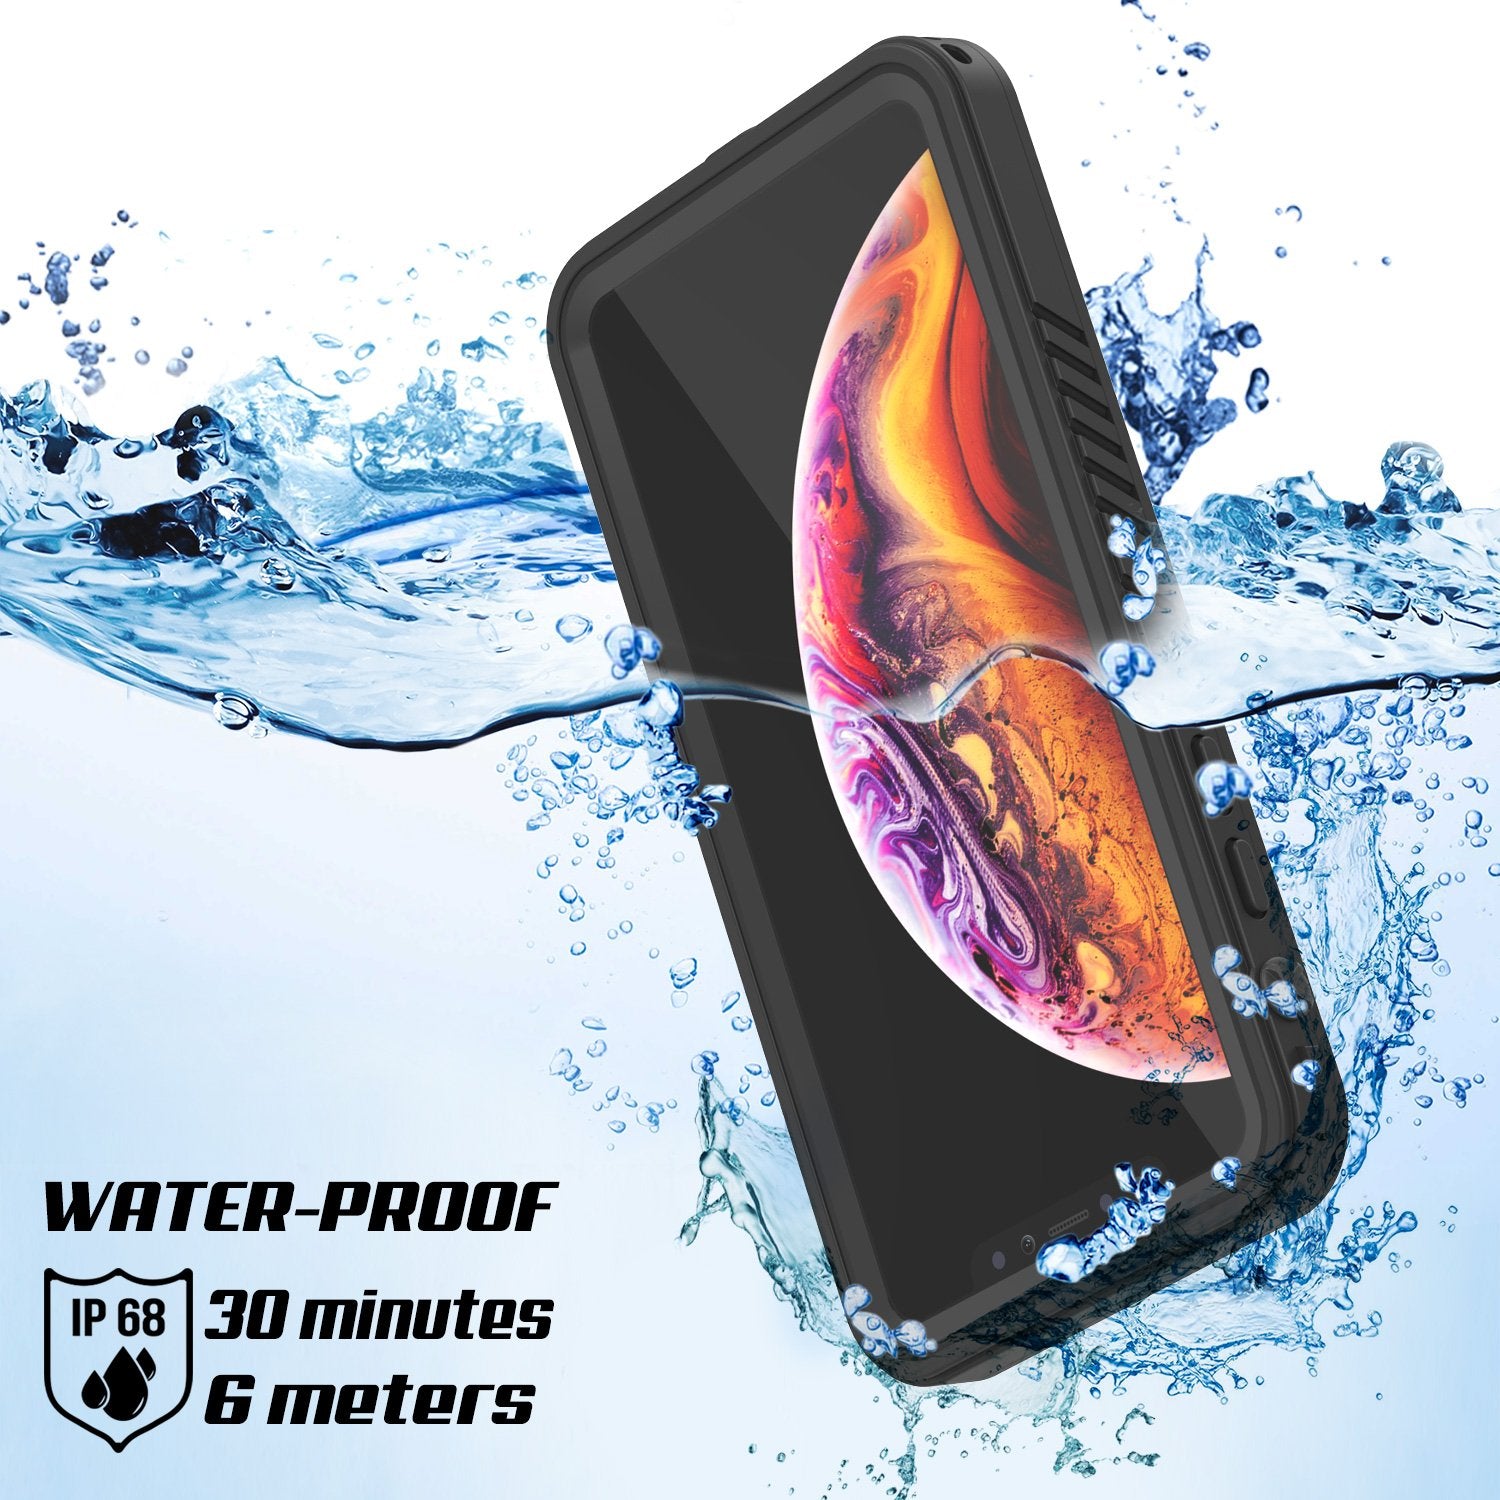 iPhone XR Waterproof Case, Punkcase [Extreme Series] Armor Cover W/ Built In Screen Protector [Black]